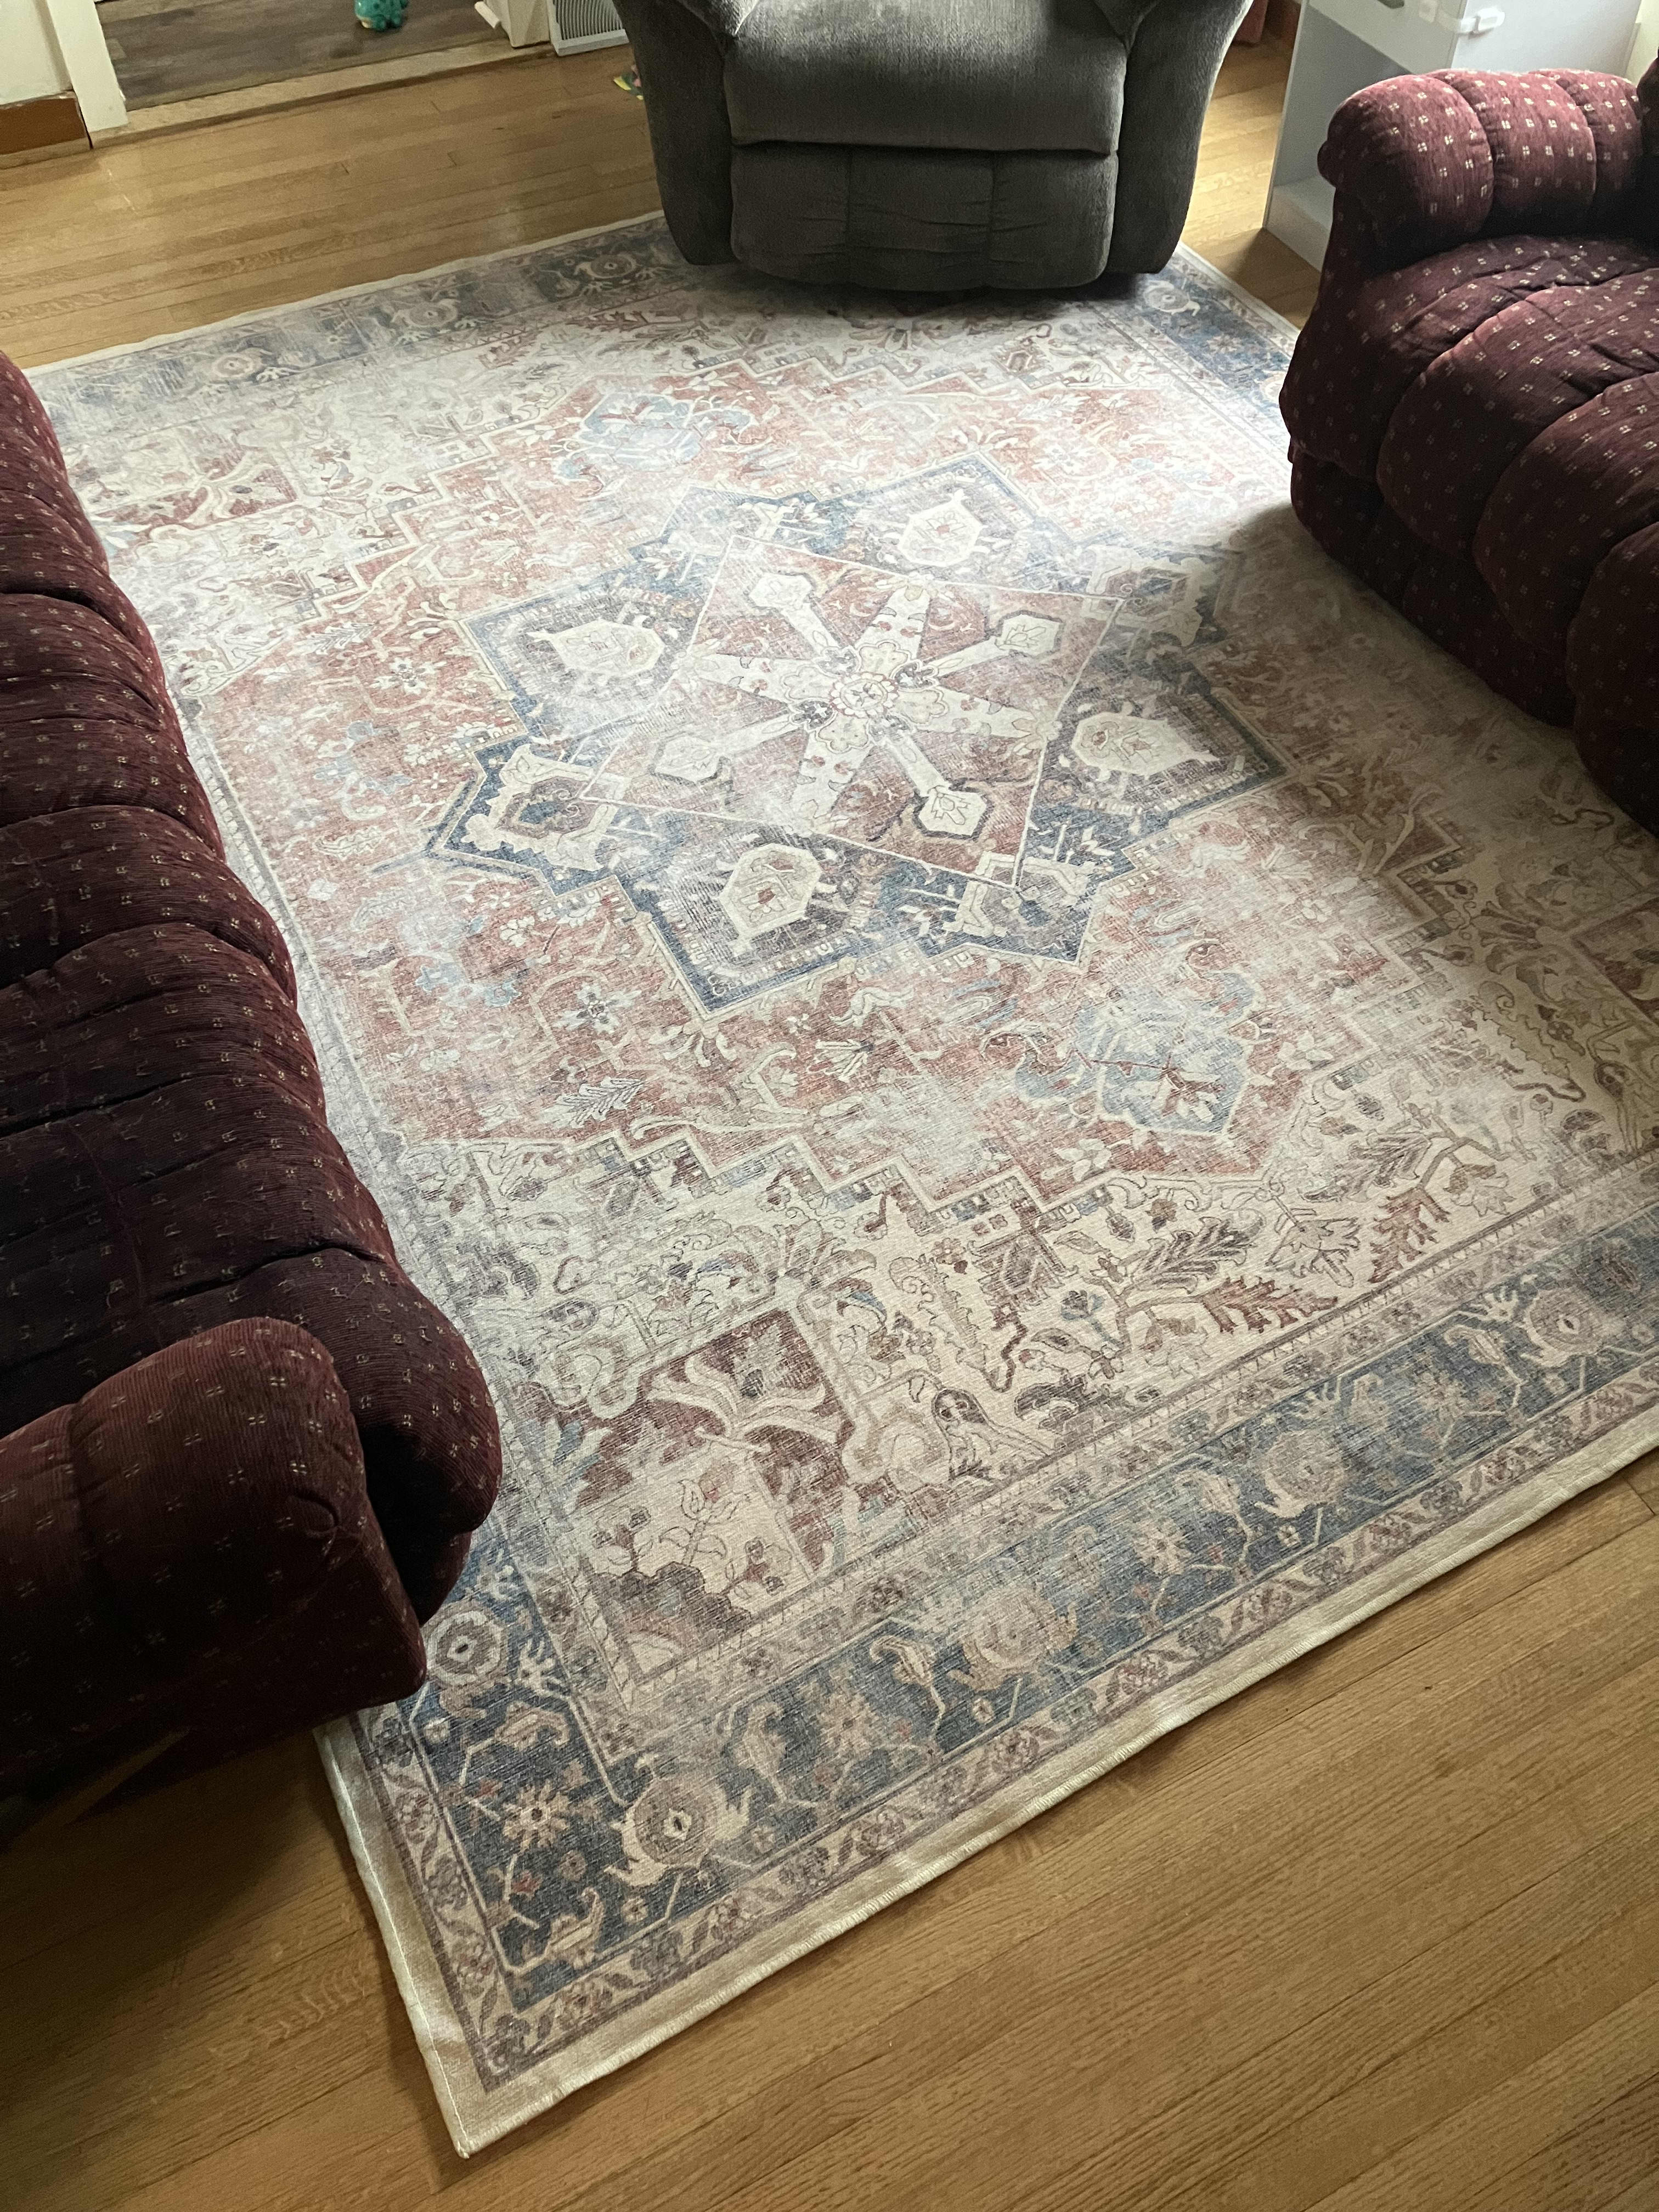 Full review of my Ruggable washable rug - Cribbs Style